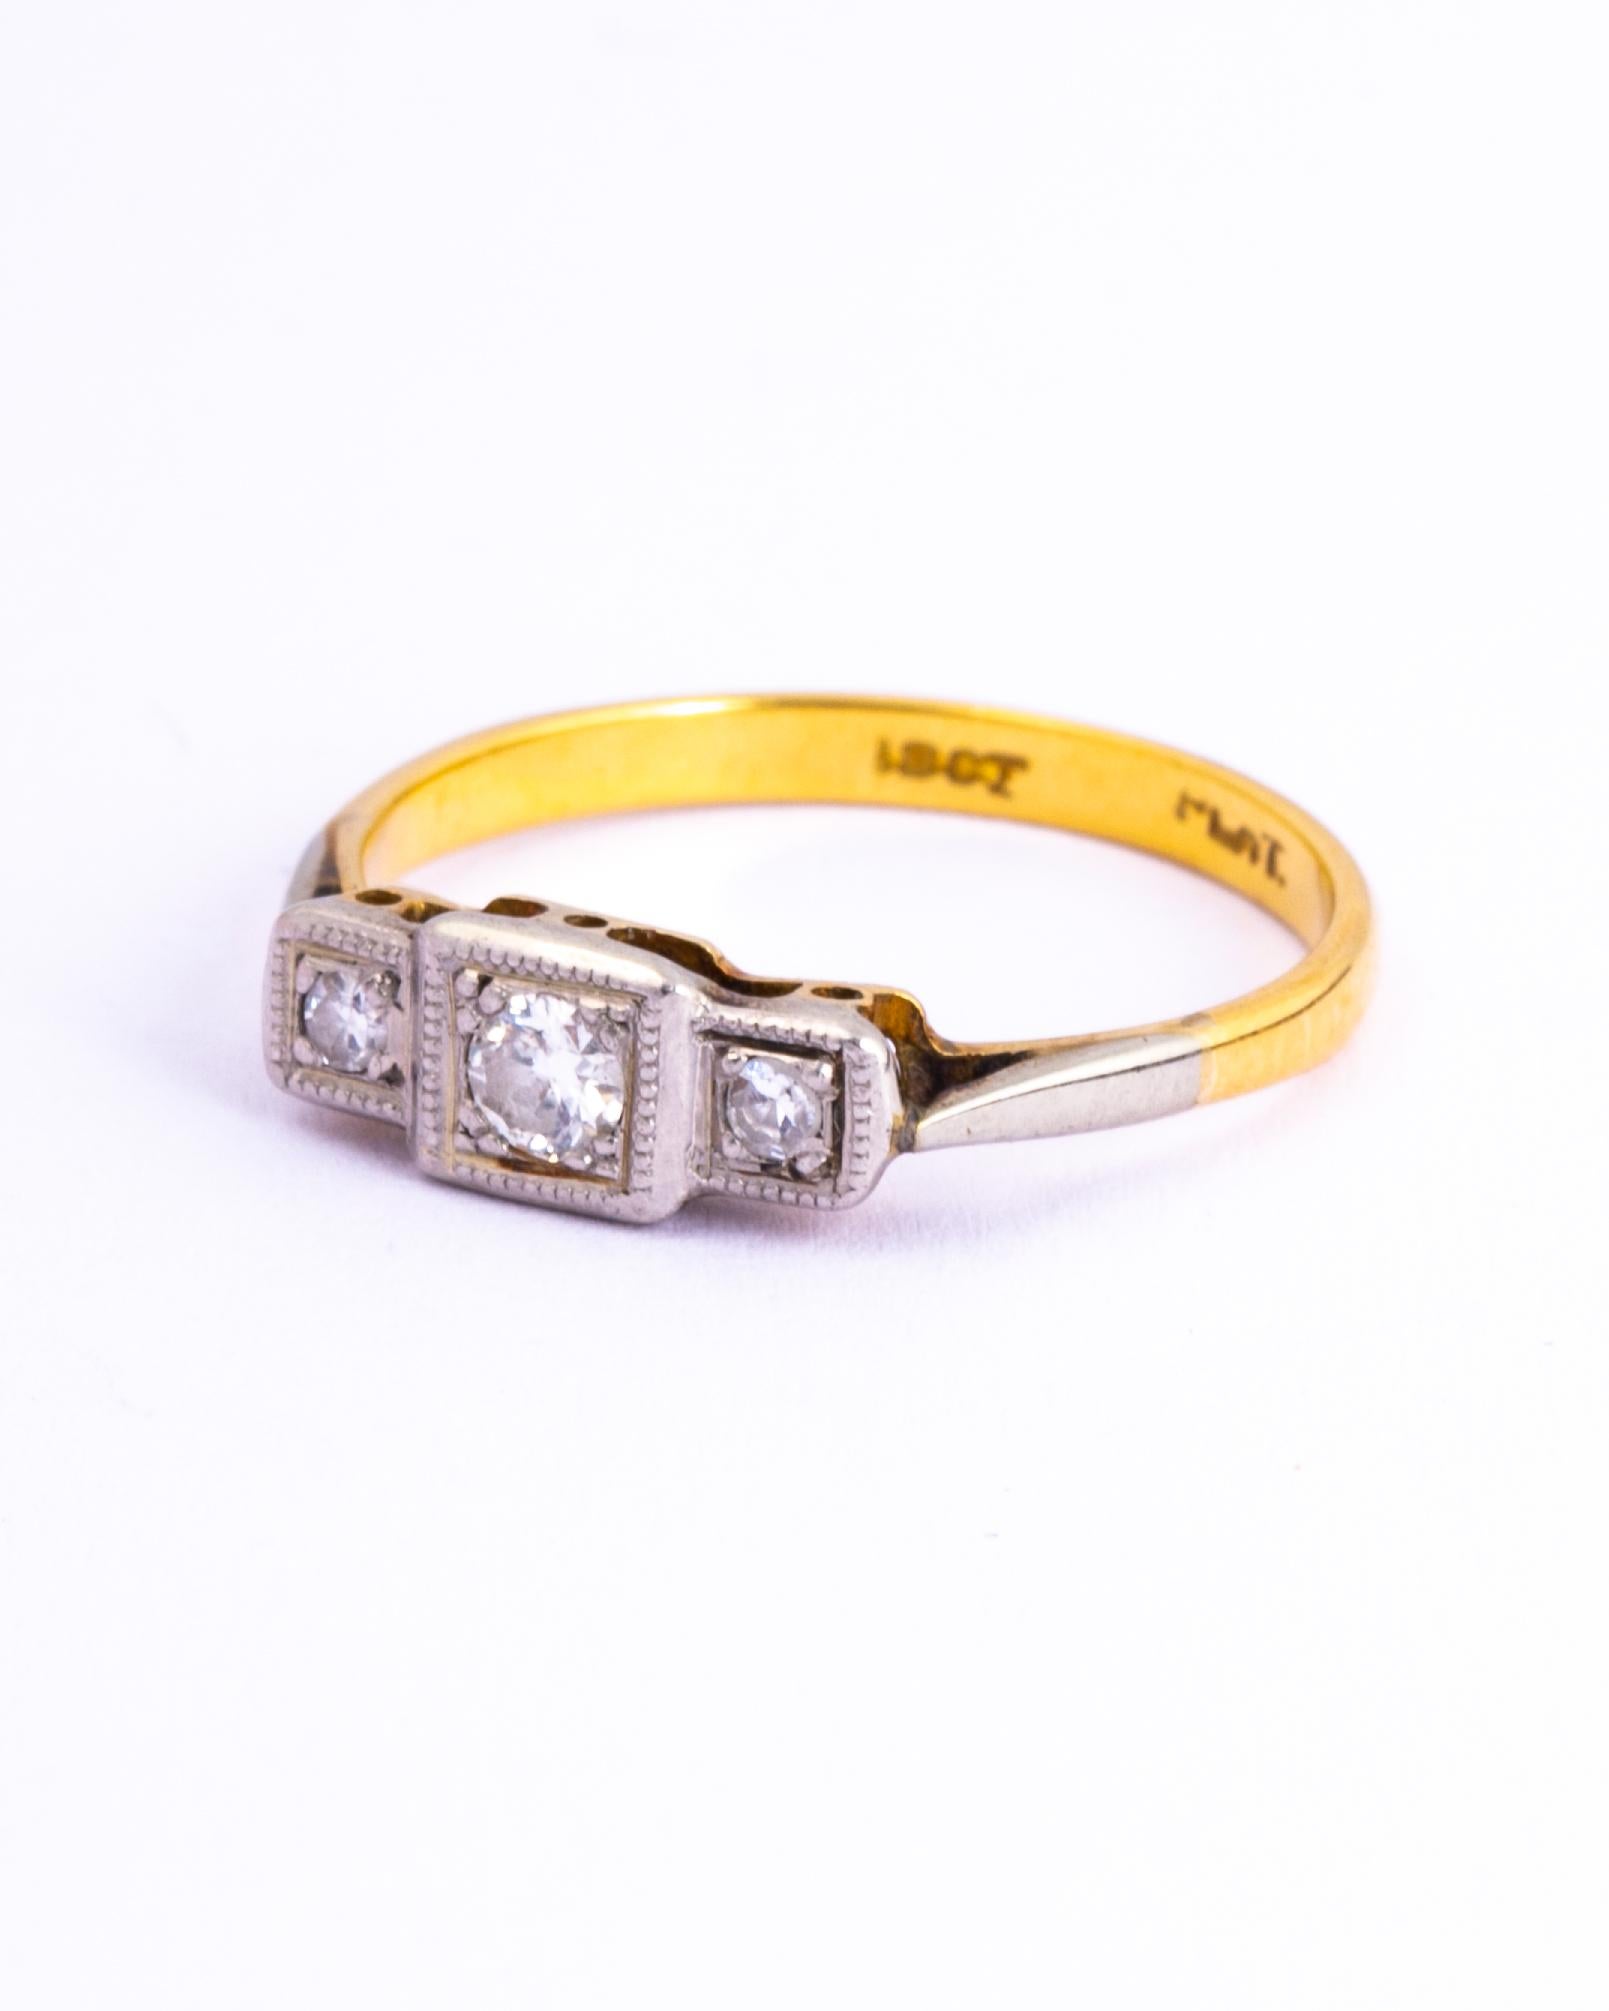 In classic Art Deco style this three stone diamond ring is made up of squares and panels of platinum. The diamonds total approx 20pts and are set upon an open work gallery.

Ring Size: M or 6 1/4 
Band Width: 5mm
Height Off Finger: 2mm

Weight: 2.1g